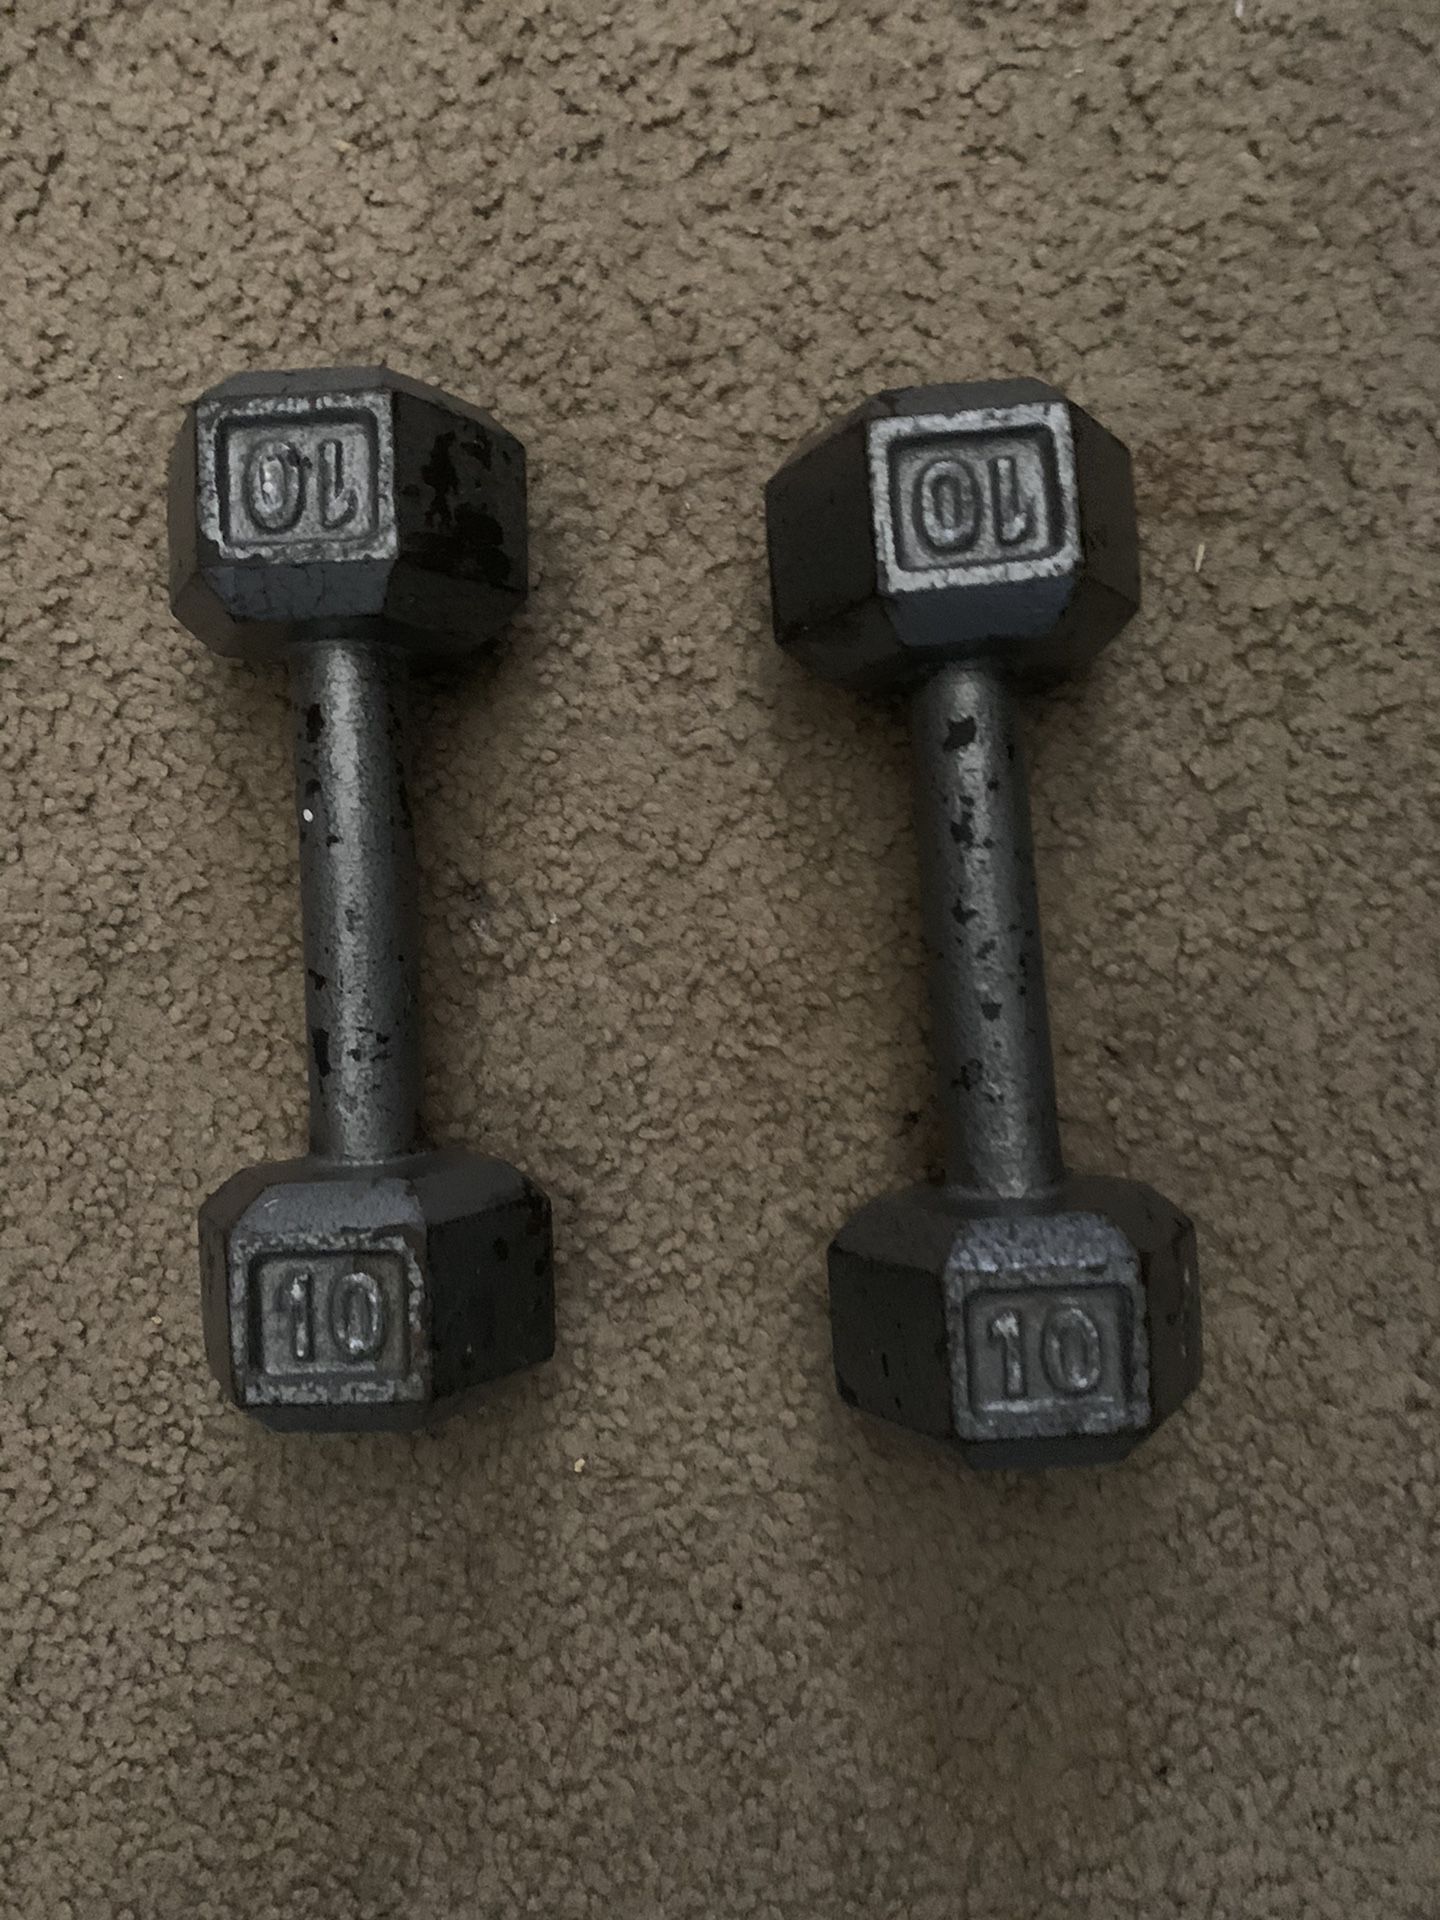 10# Hex weights (2 of them). $35